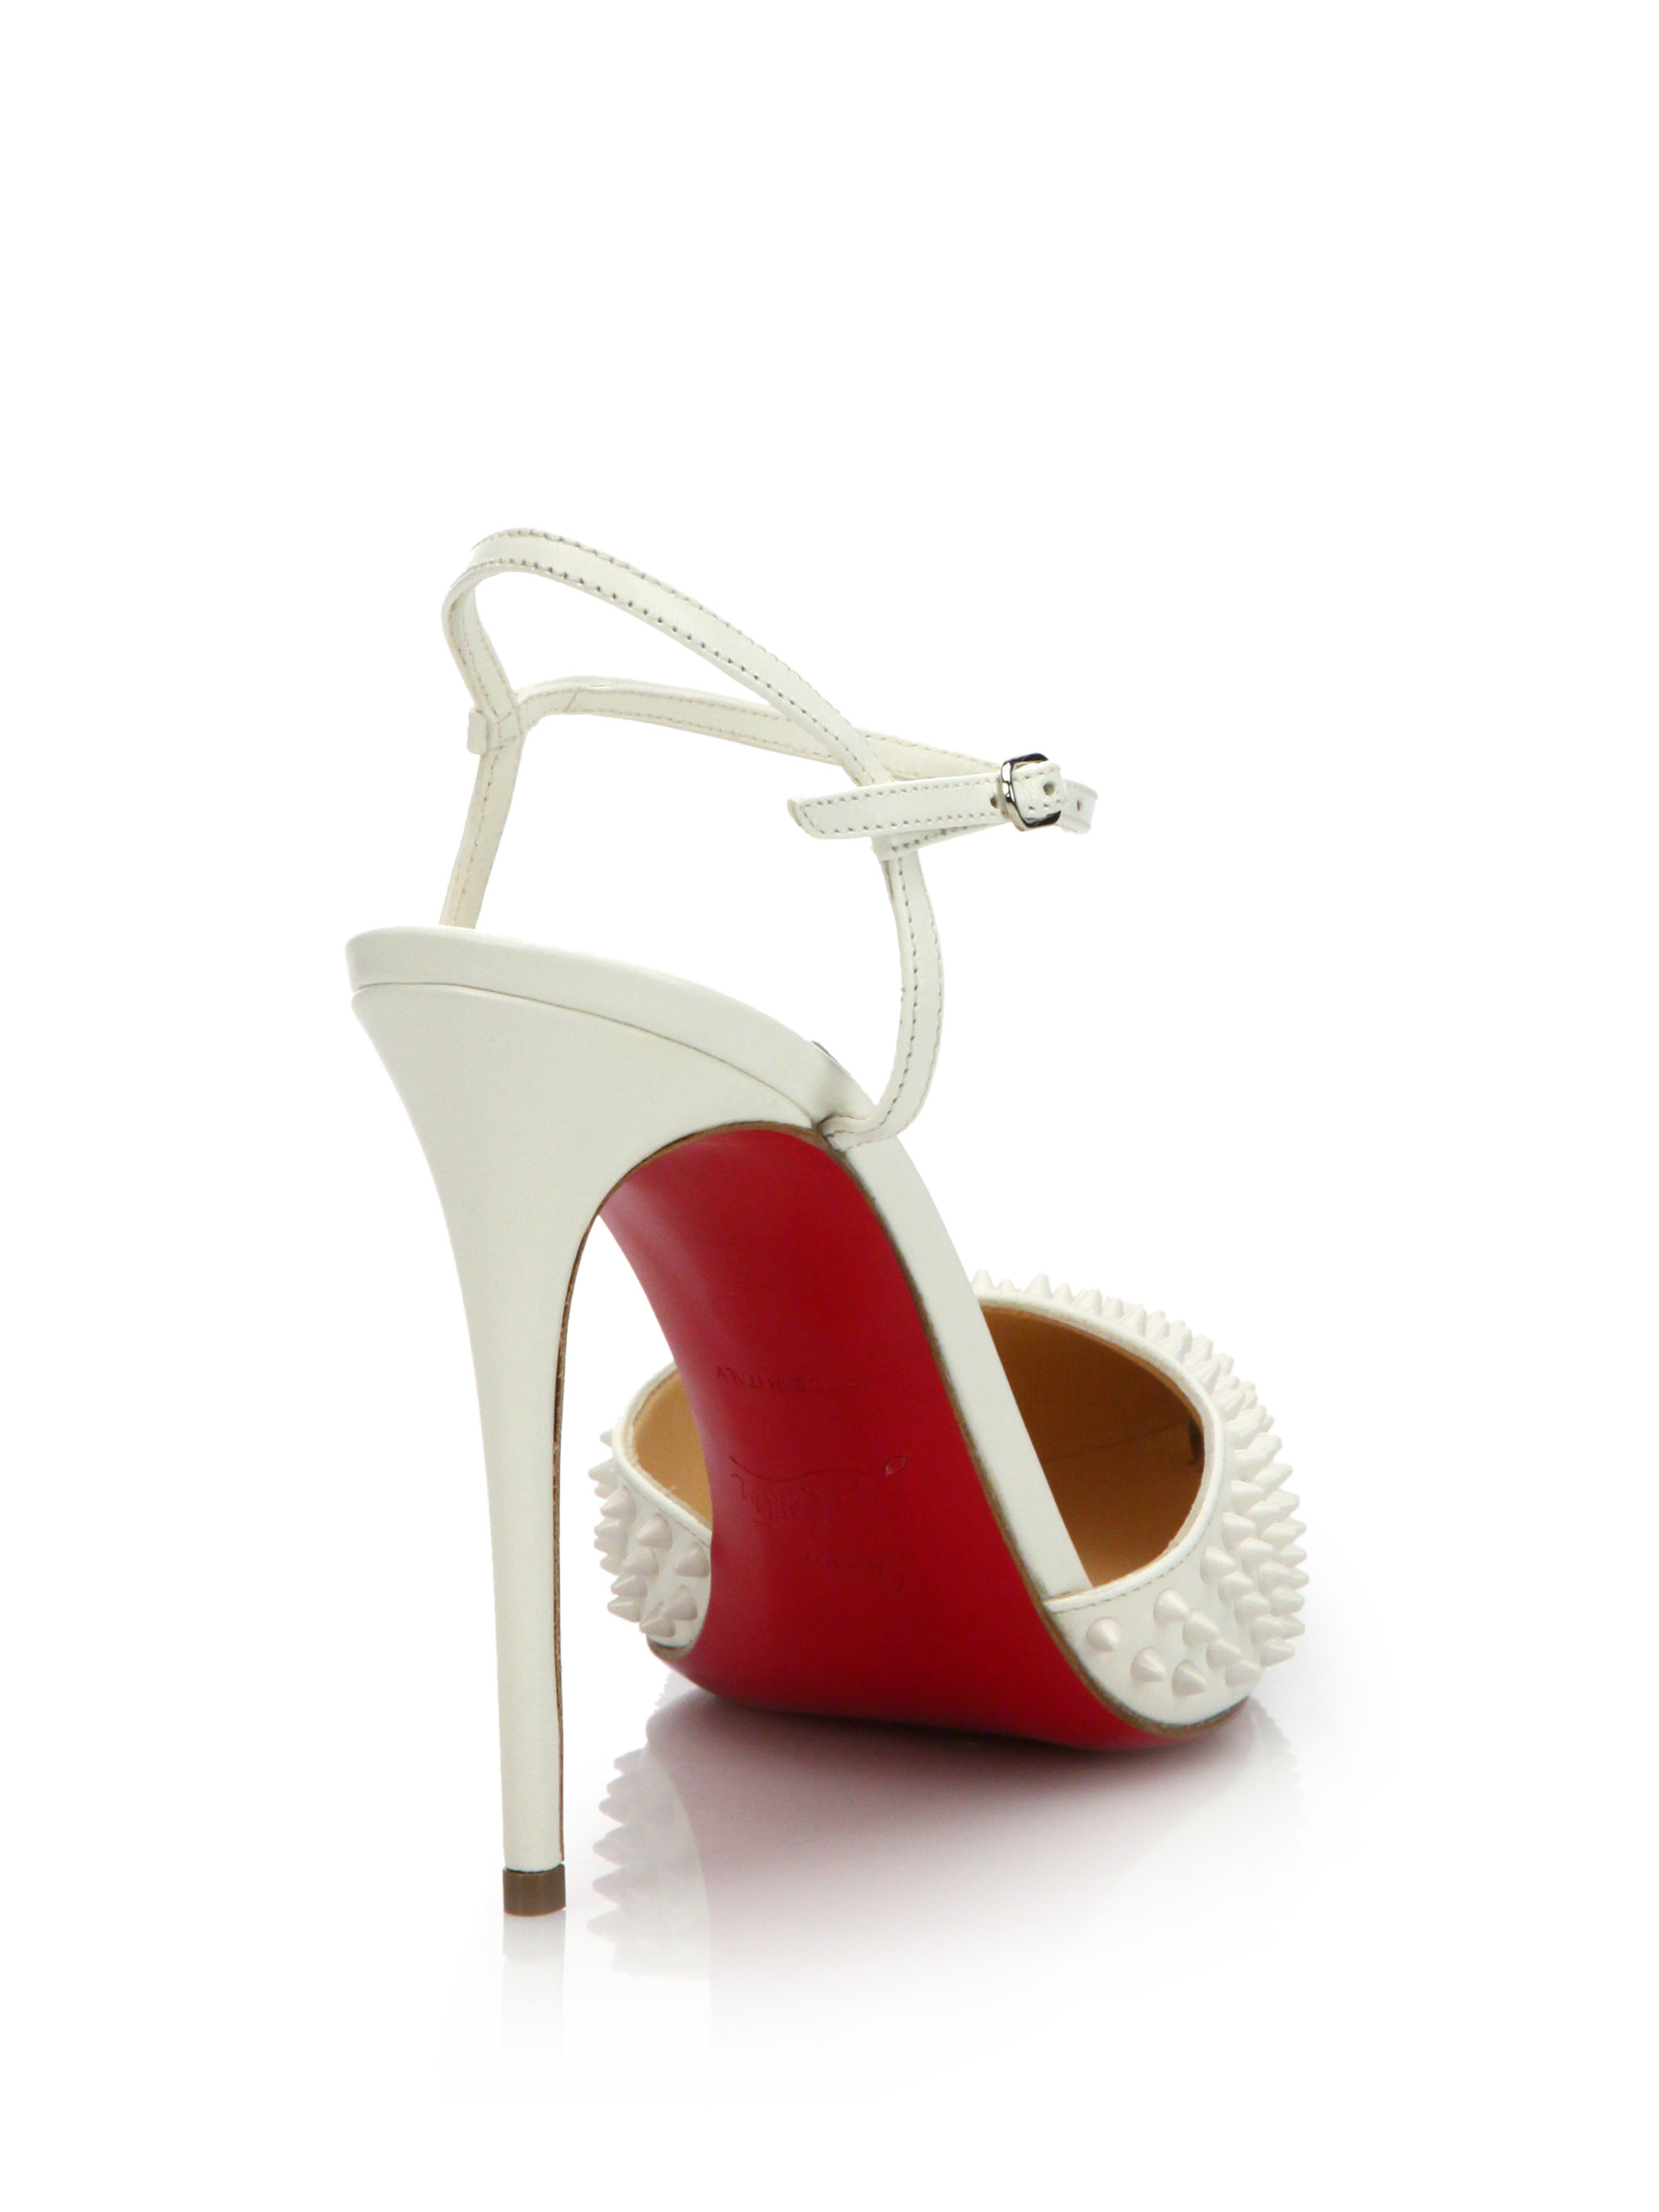 Christian louboutin Spiked Patent Leather Slingback Pumps in White ...  